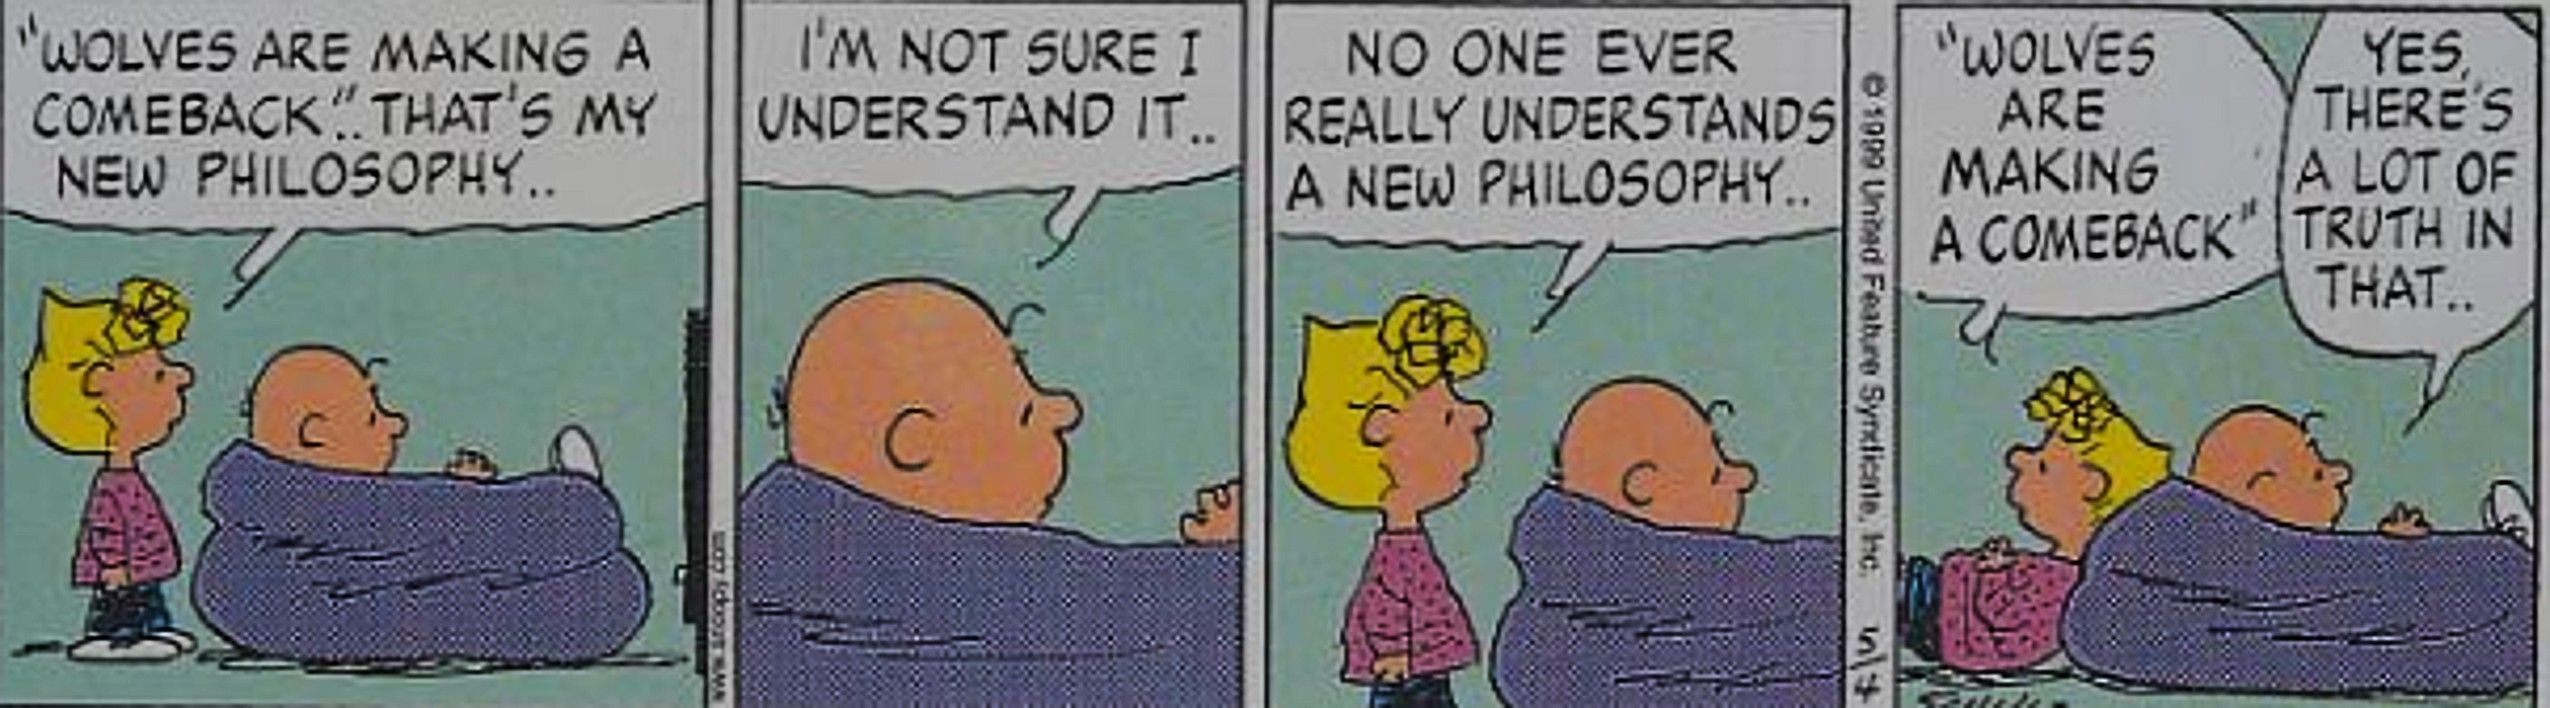 Peanuts, Sally Brown espouses her new philosophy: "wolves are making a comeback"